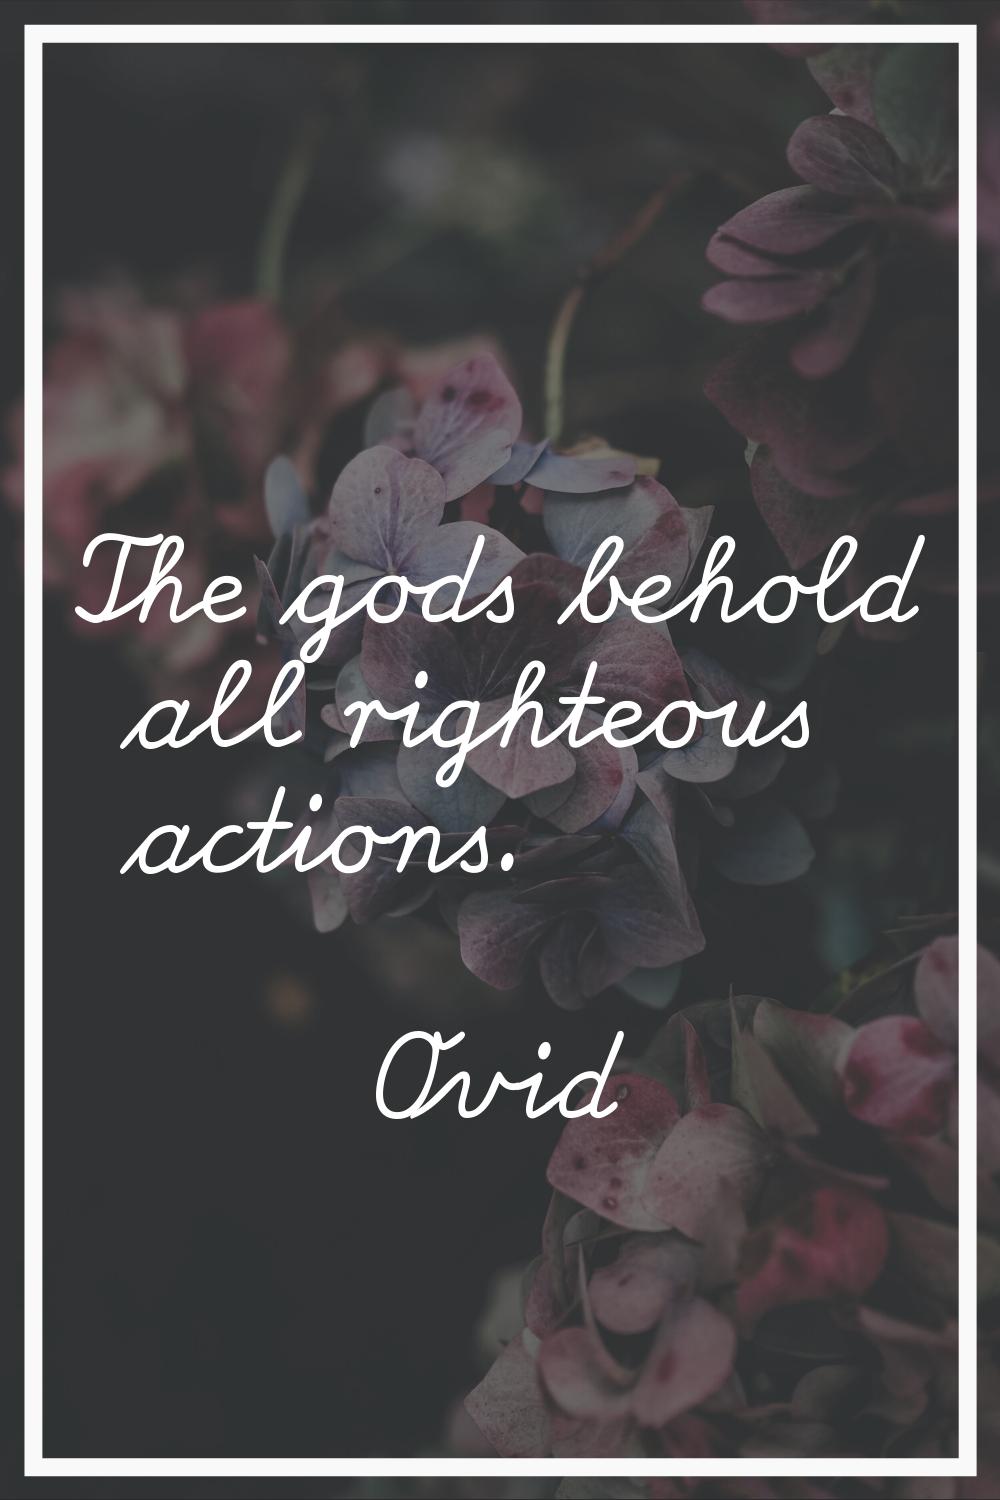 The gods behold all righteous actions.